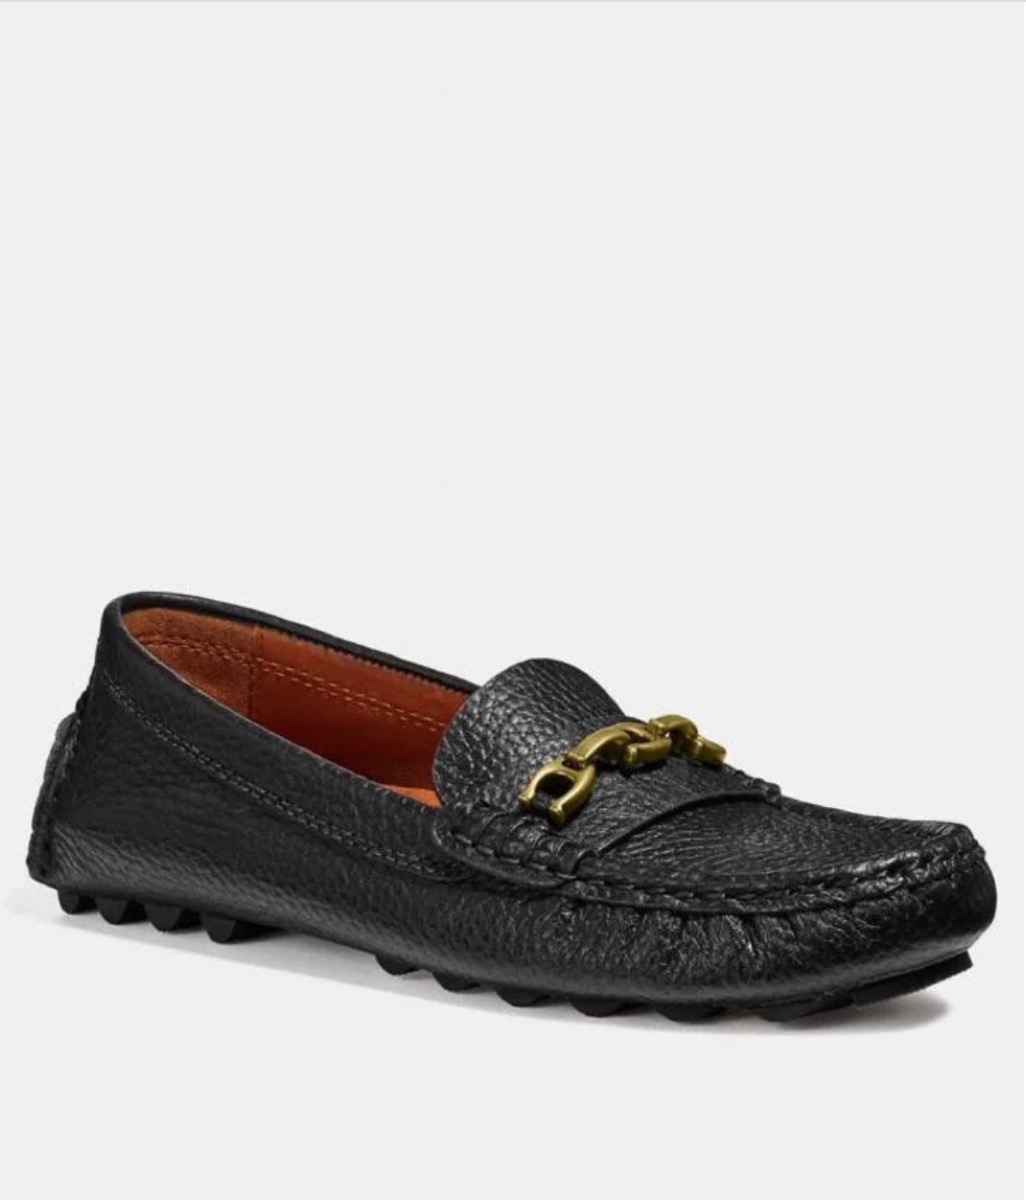 black leather driving shoes, end of summer sales 2019